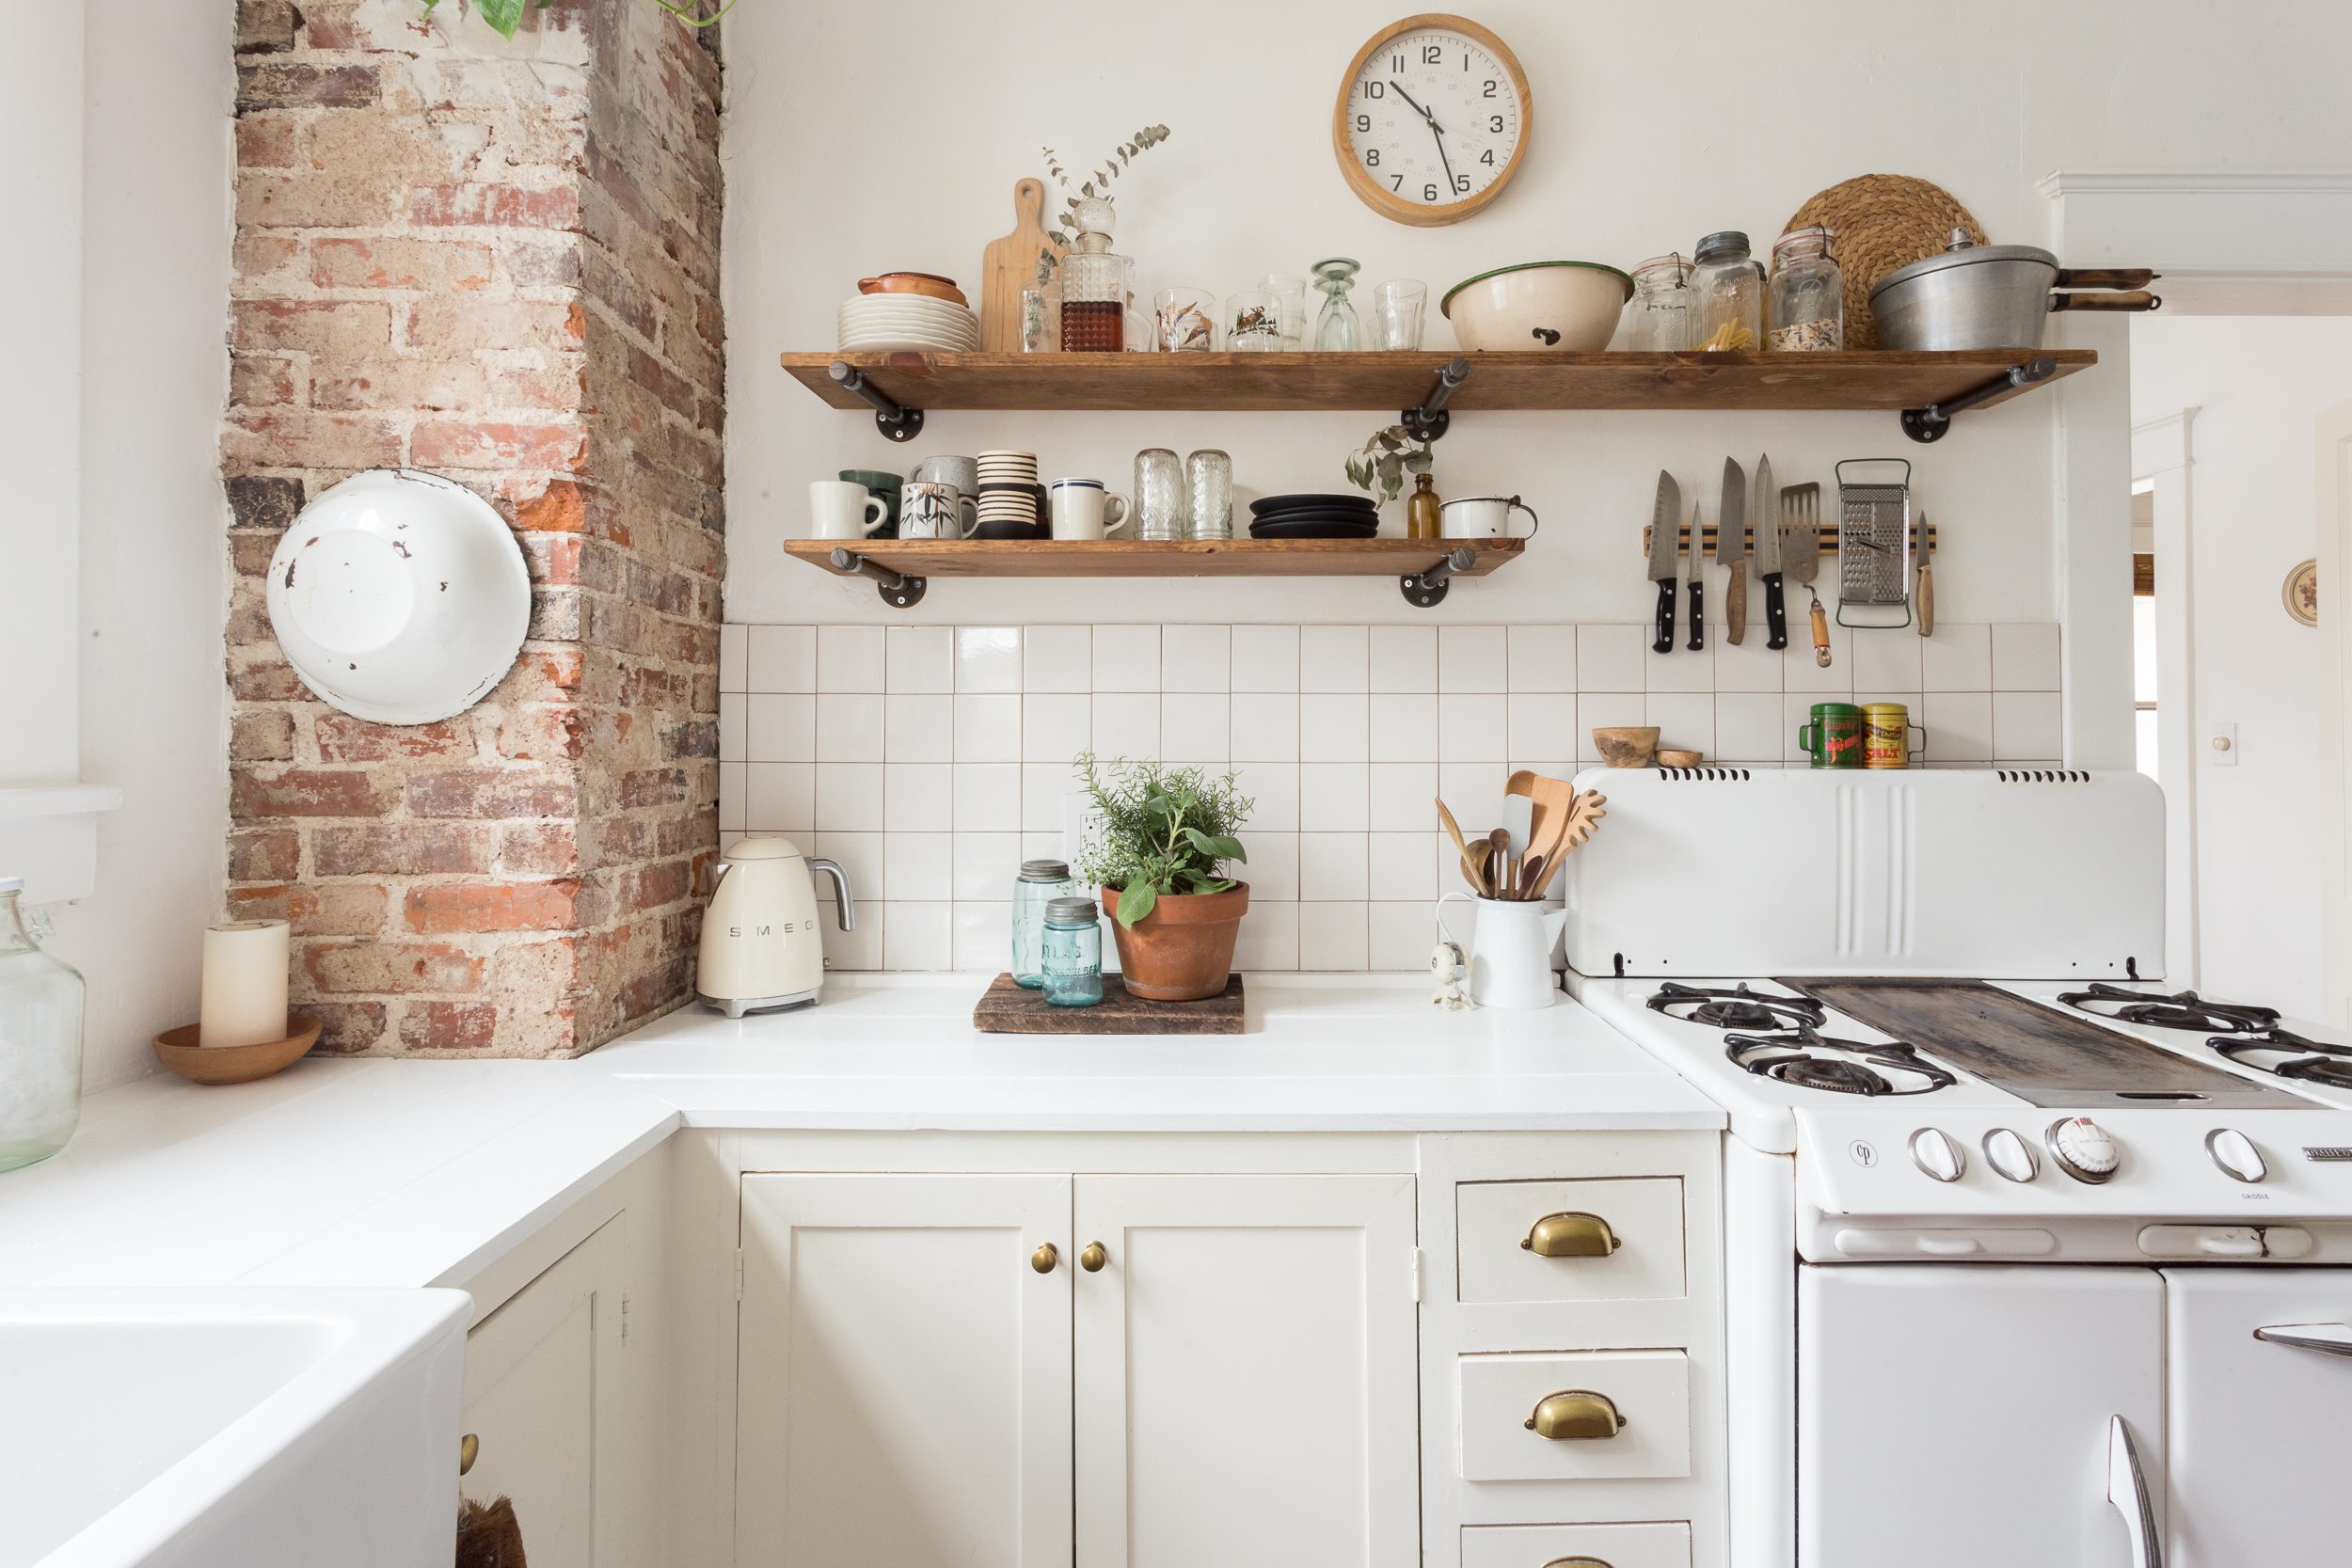 Classic Kitchen Accessories That Will Look Good in Any Home ...